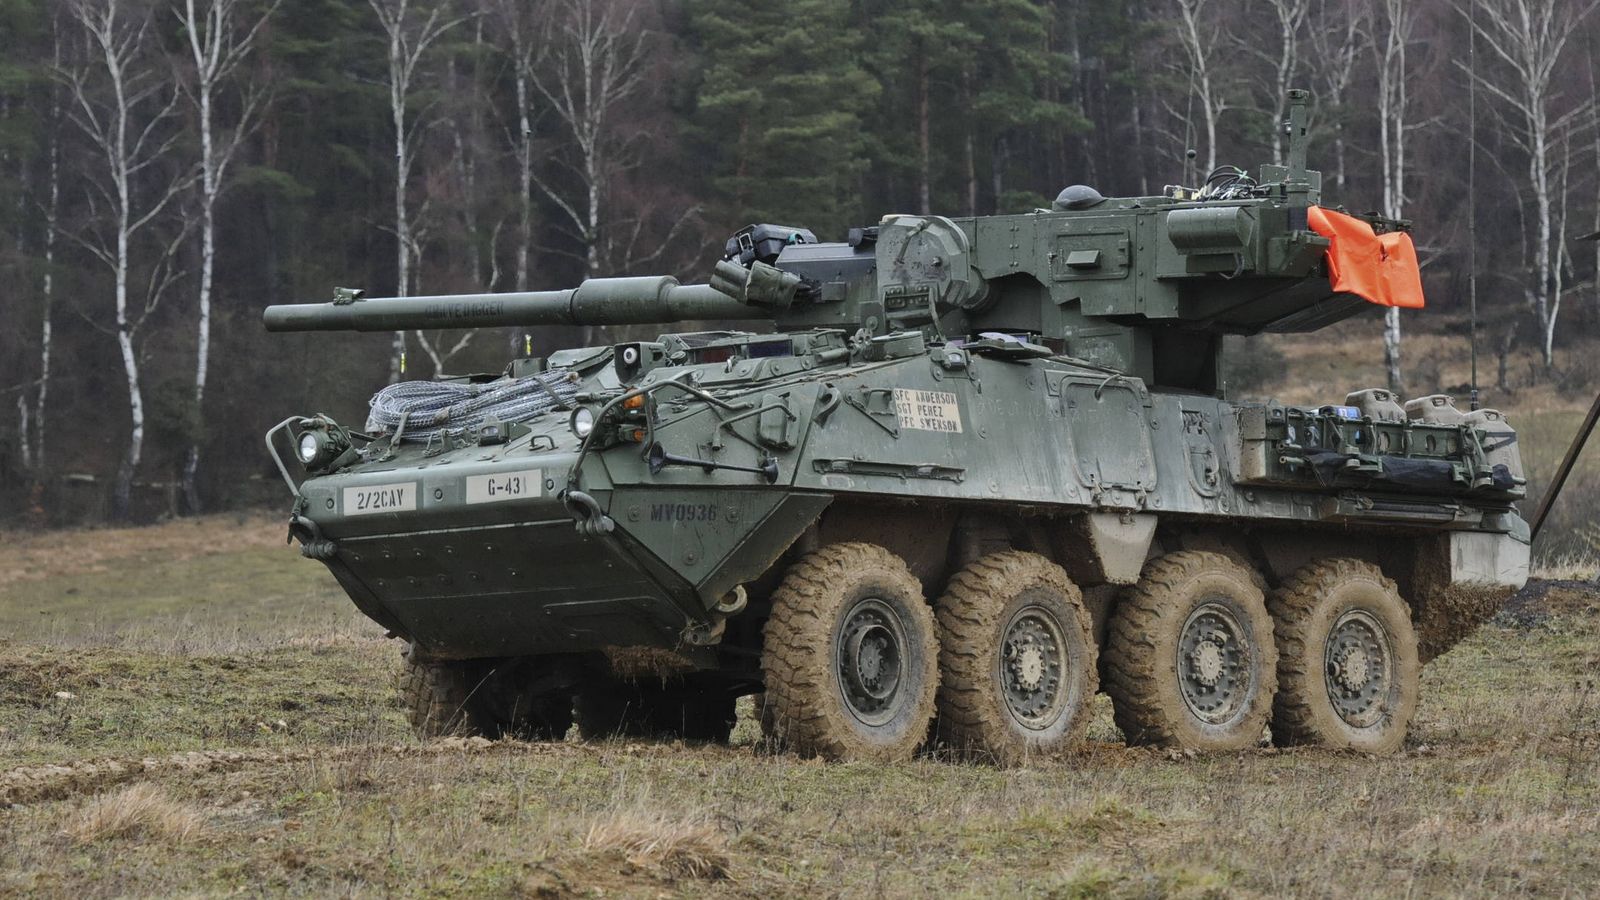 Stryker MGS (Mobile Gun System) (US Army)